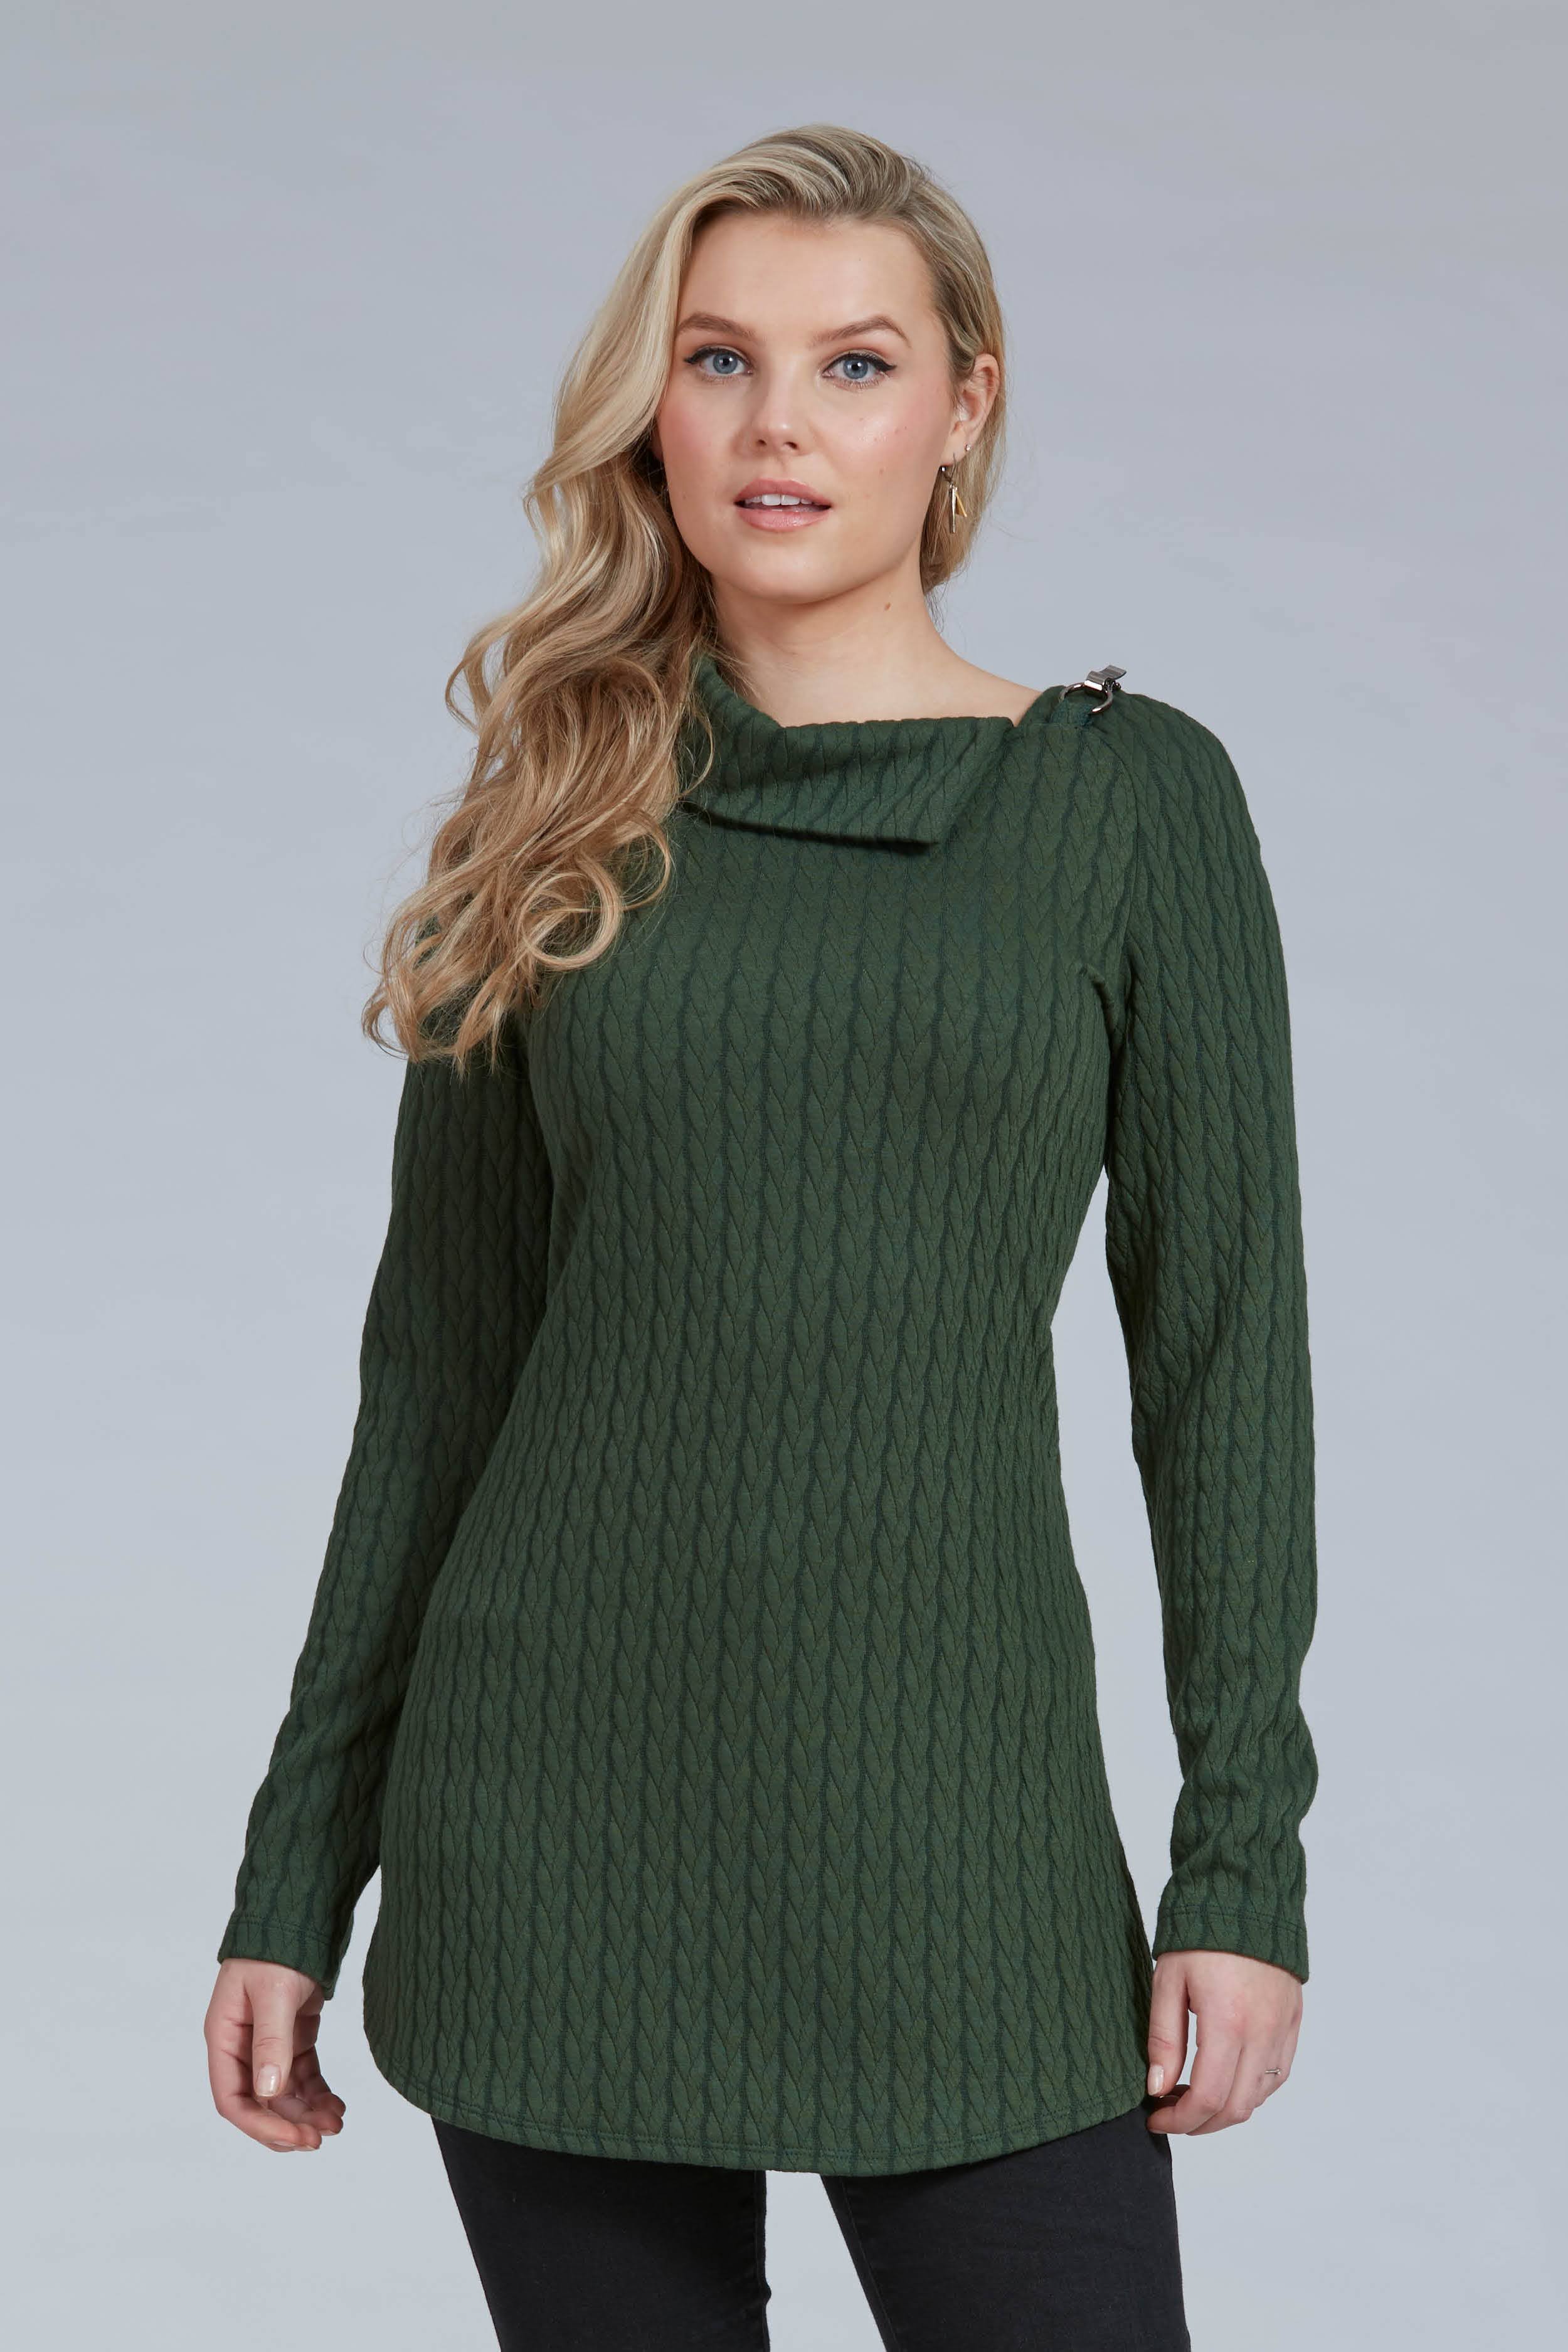 Dare Tunic by Luc Fontaine, Olive, large collar that's open at one side, buckle detail at shoulder, cable knit, rounded hem, sizes 4-16, made in Canada